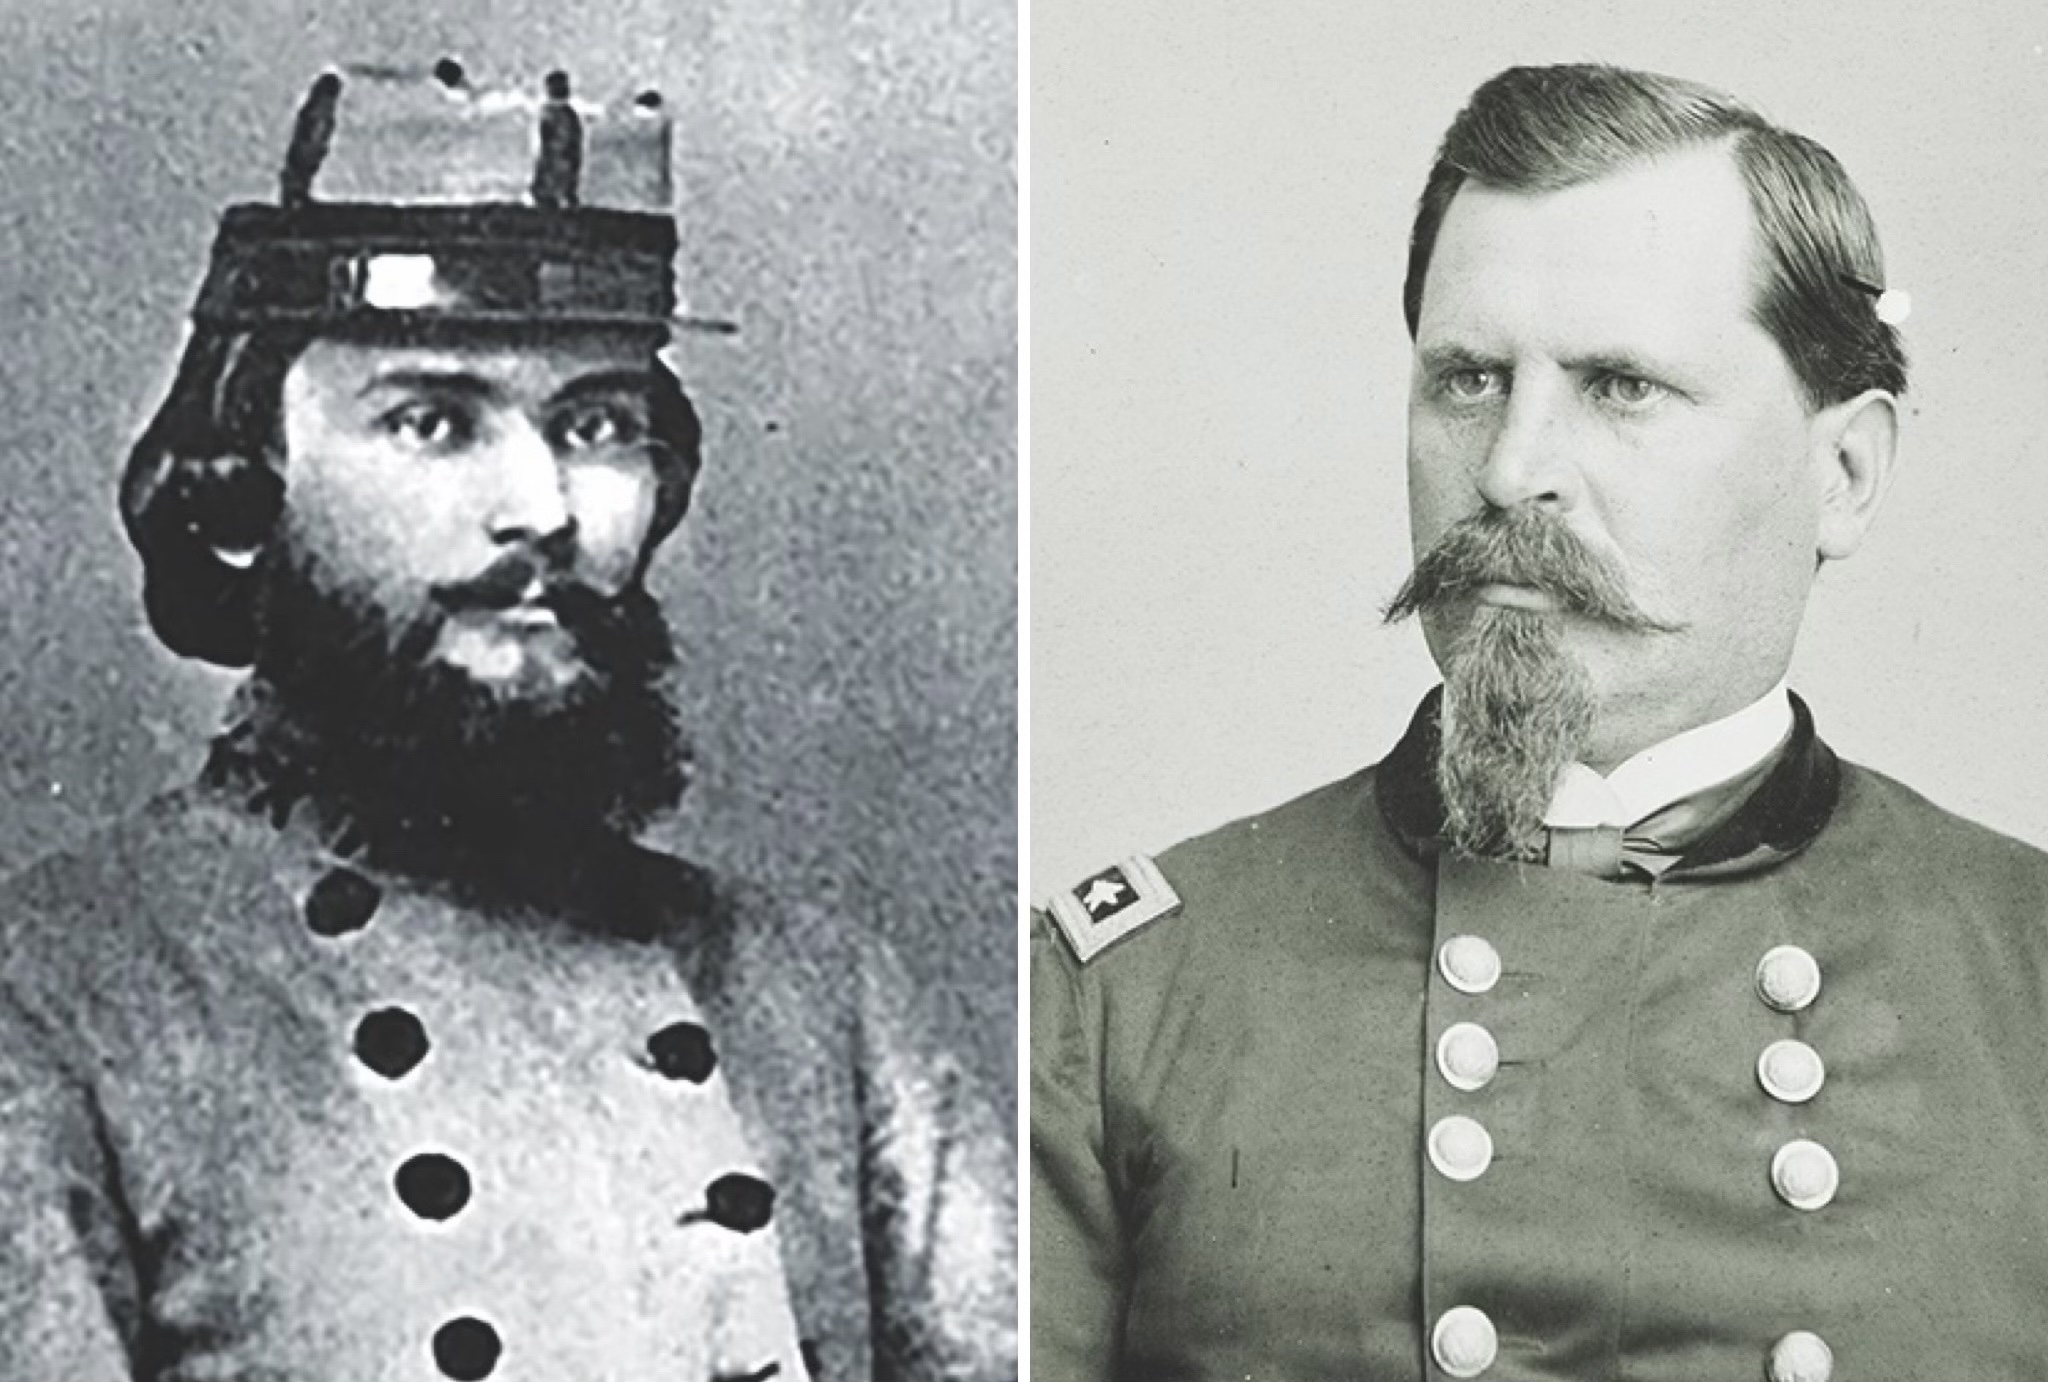 Colonel William Oates of the 15th Alabama (left) and Union Brig. Gen. William Hazen. Oates was among the Confederates wounded during the engagement. (Alabama Department of Archives and History; Library of Congress)